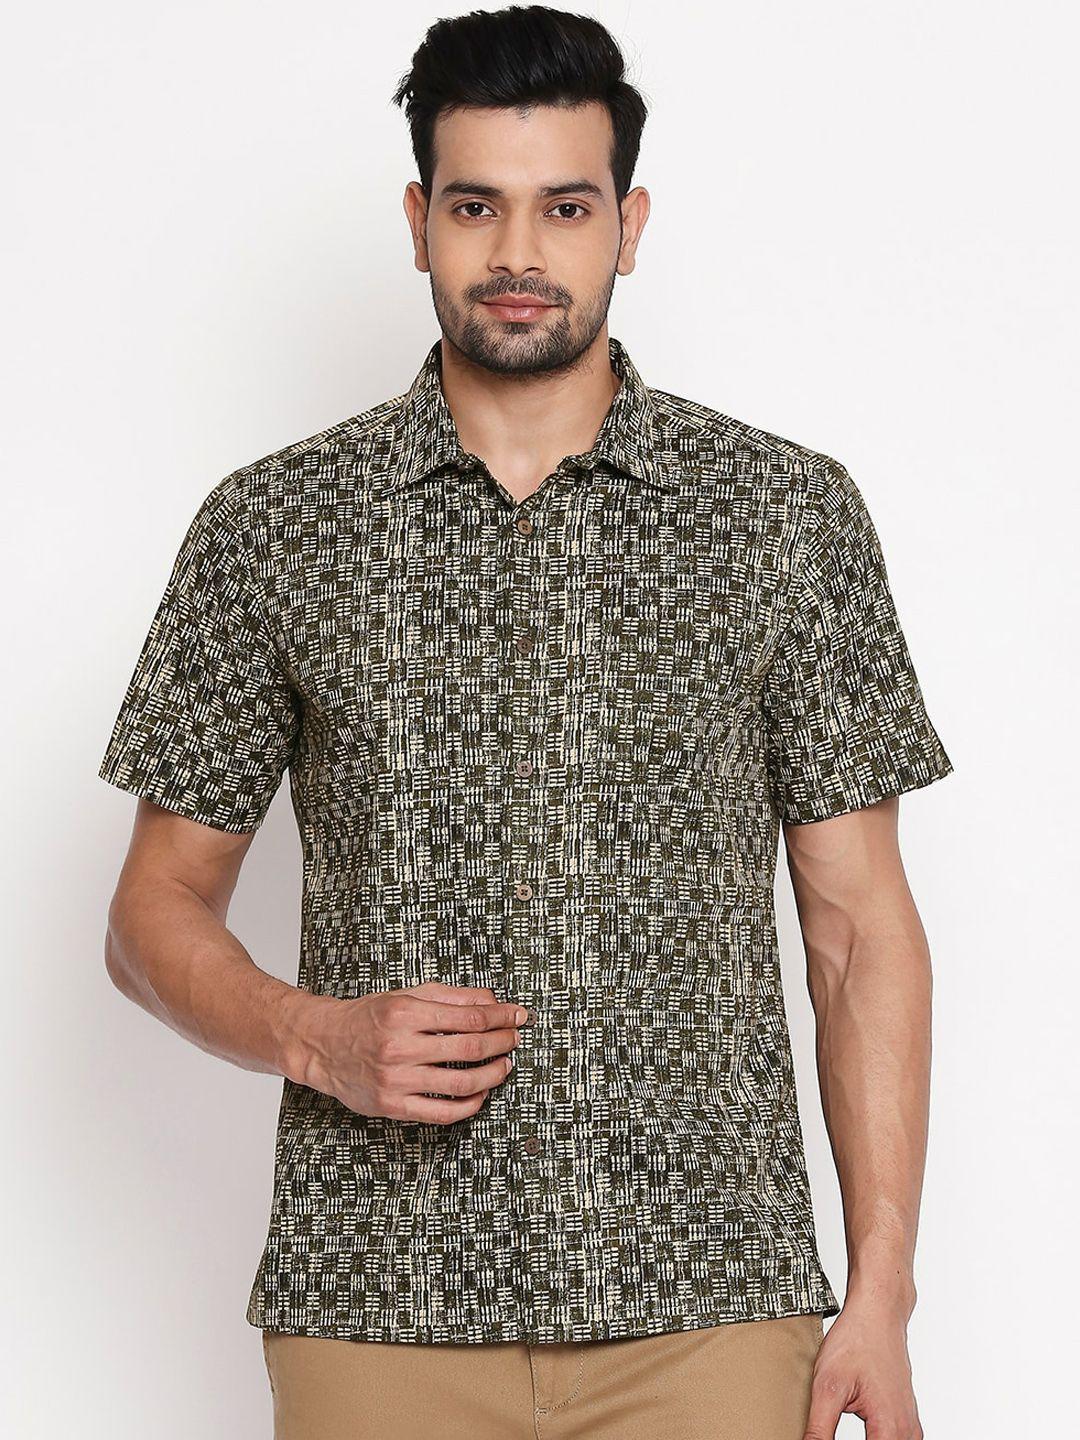 indus route by pantaloons men olive green & beige regular fit printed cotton casual shirt